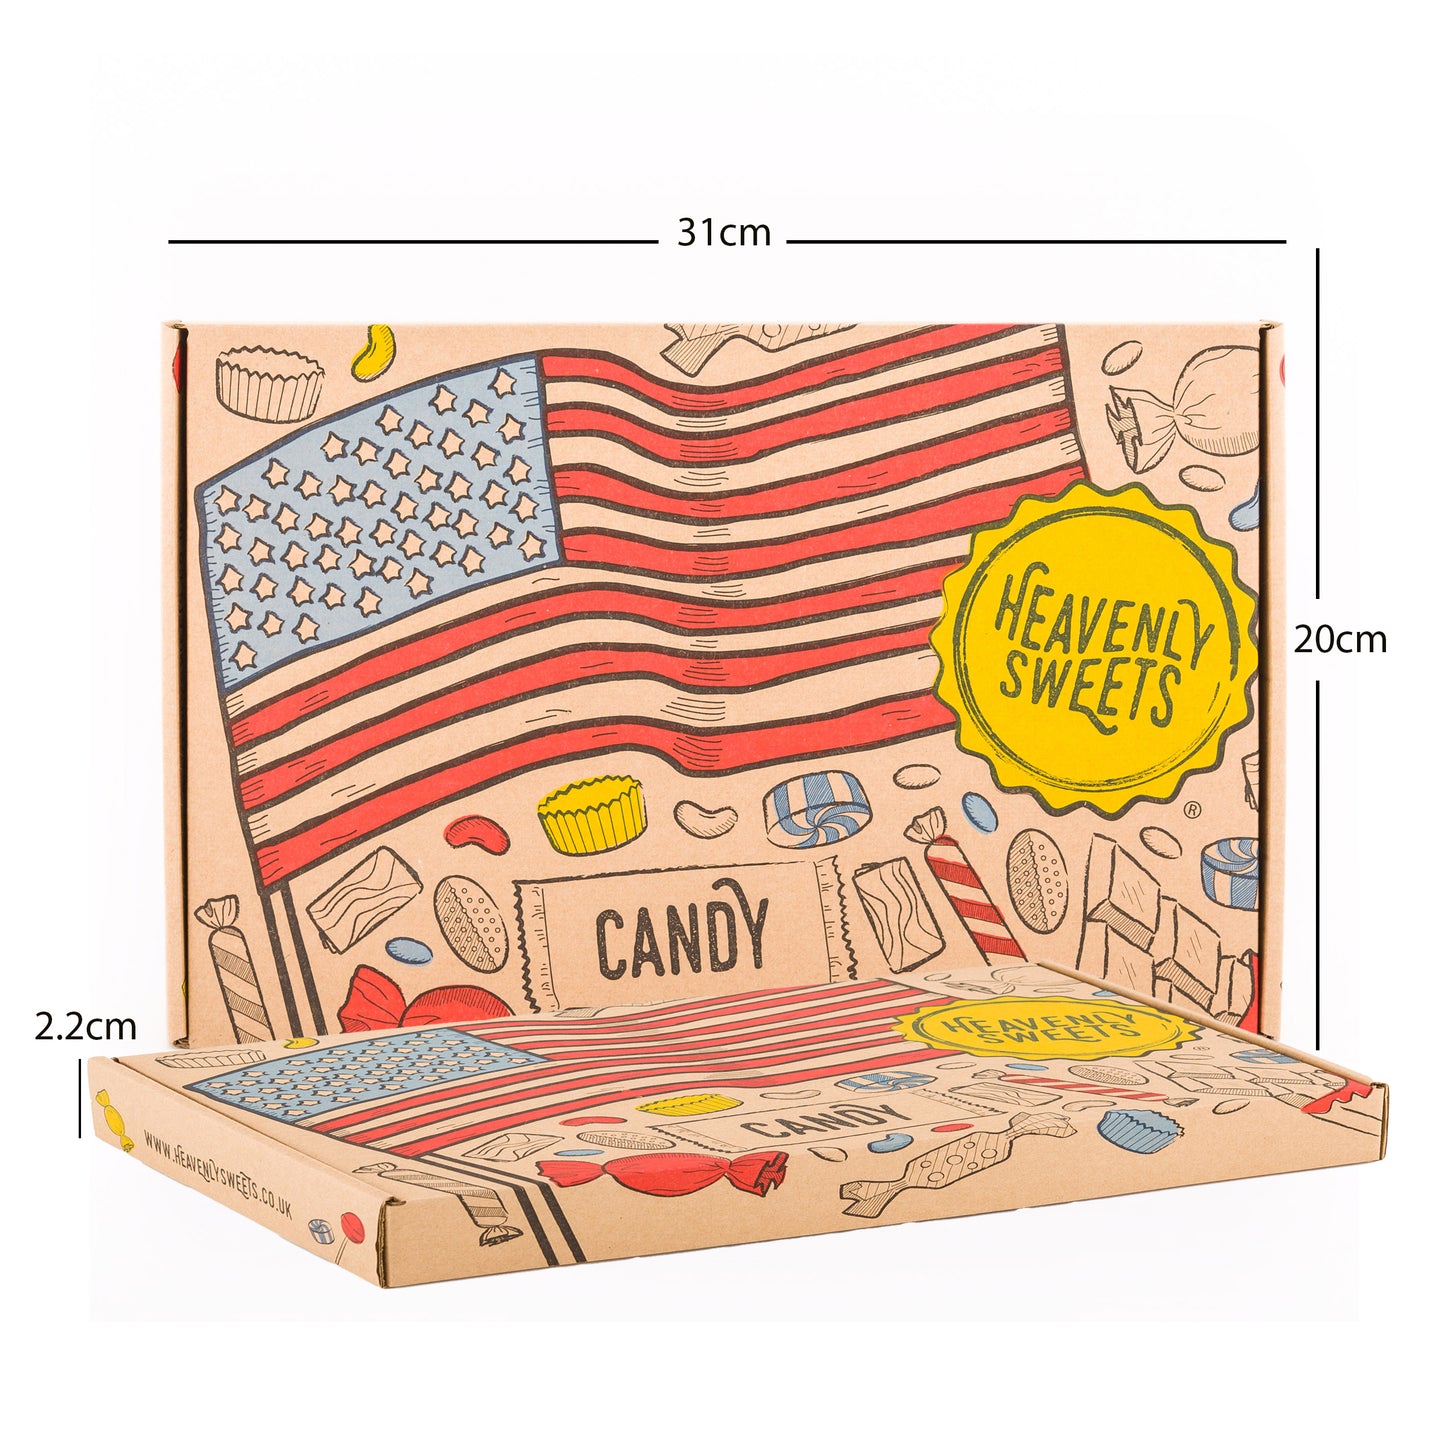 American Party Mix Candy Box - Large